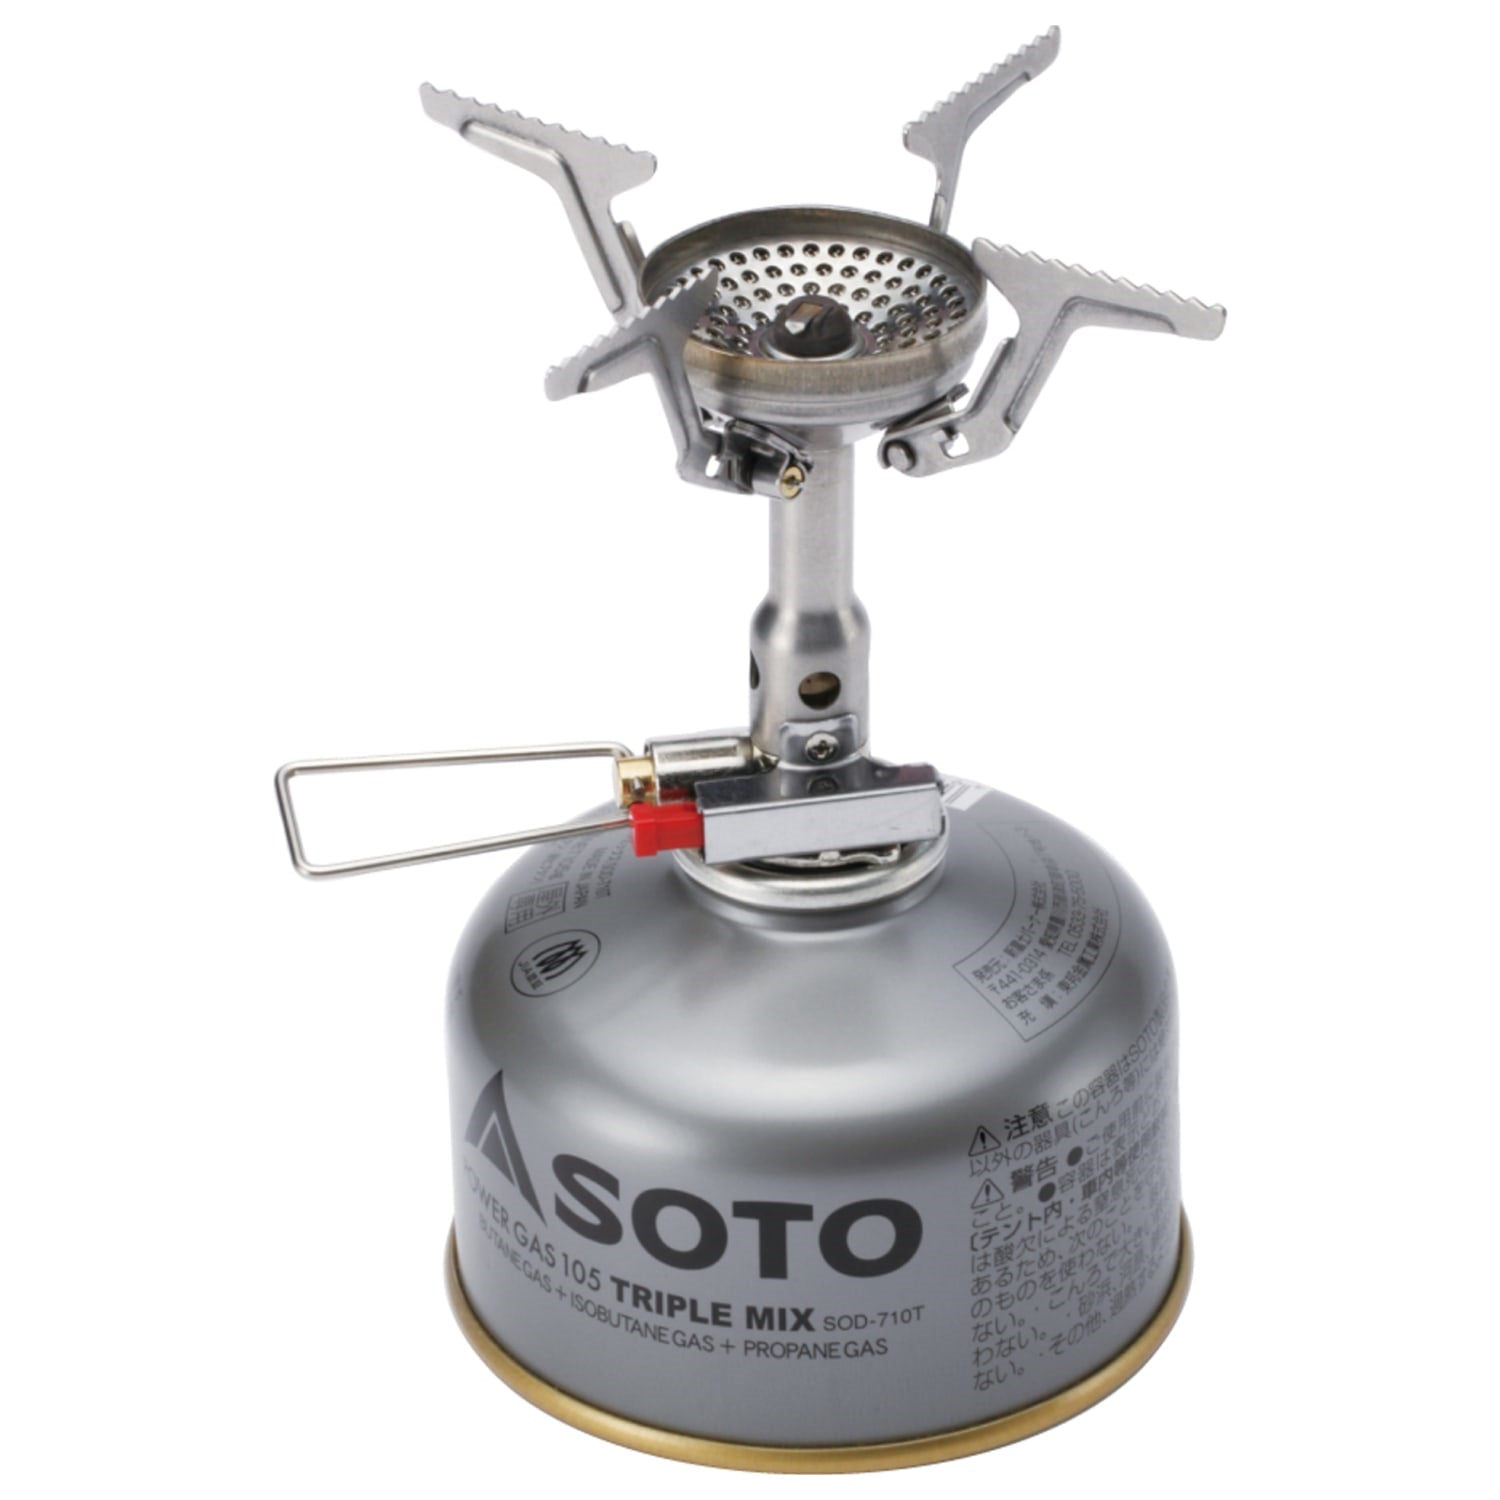 Soto Soto Amicus Stove with Ignitor, 75g